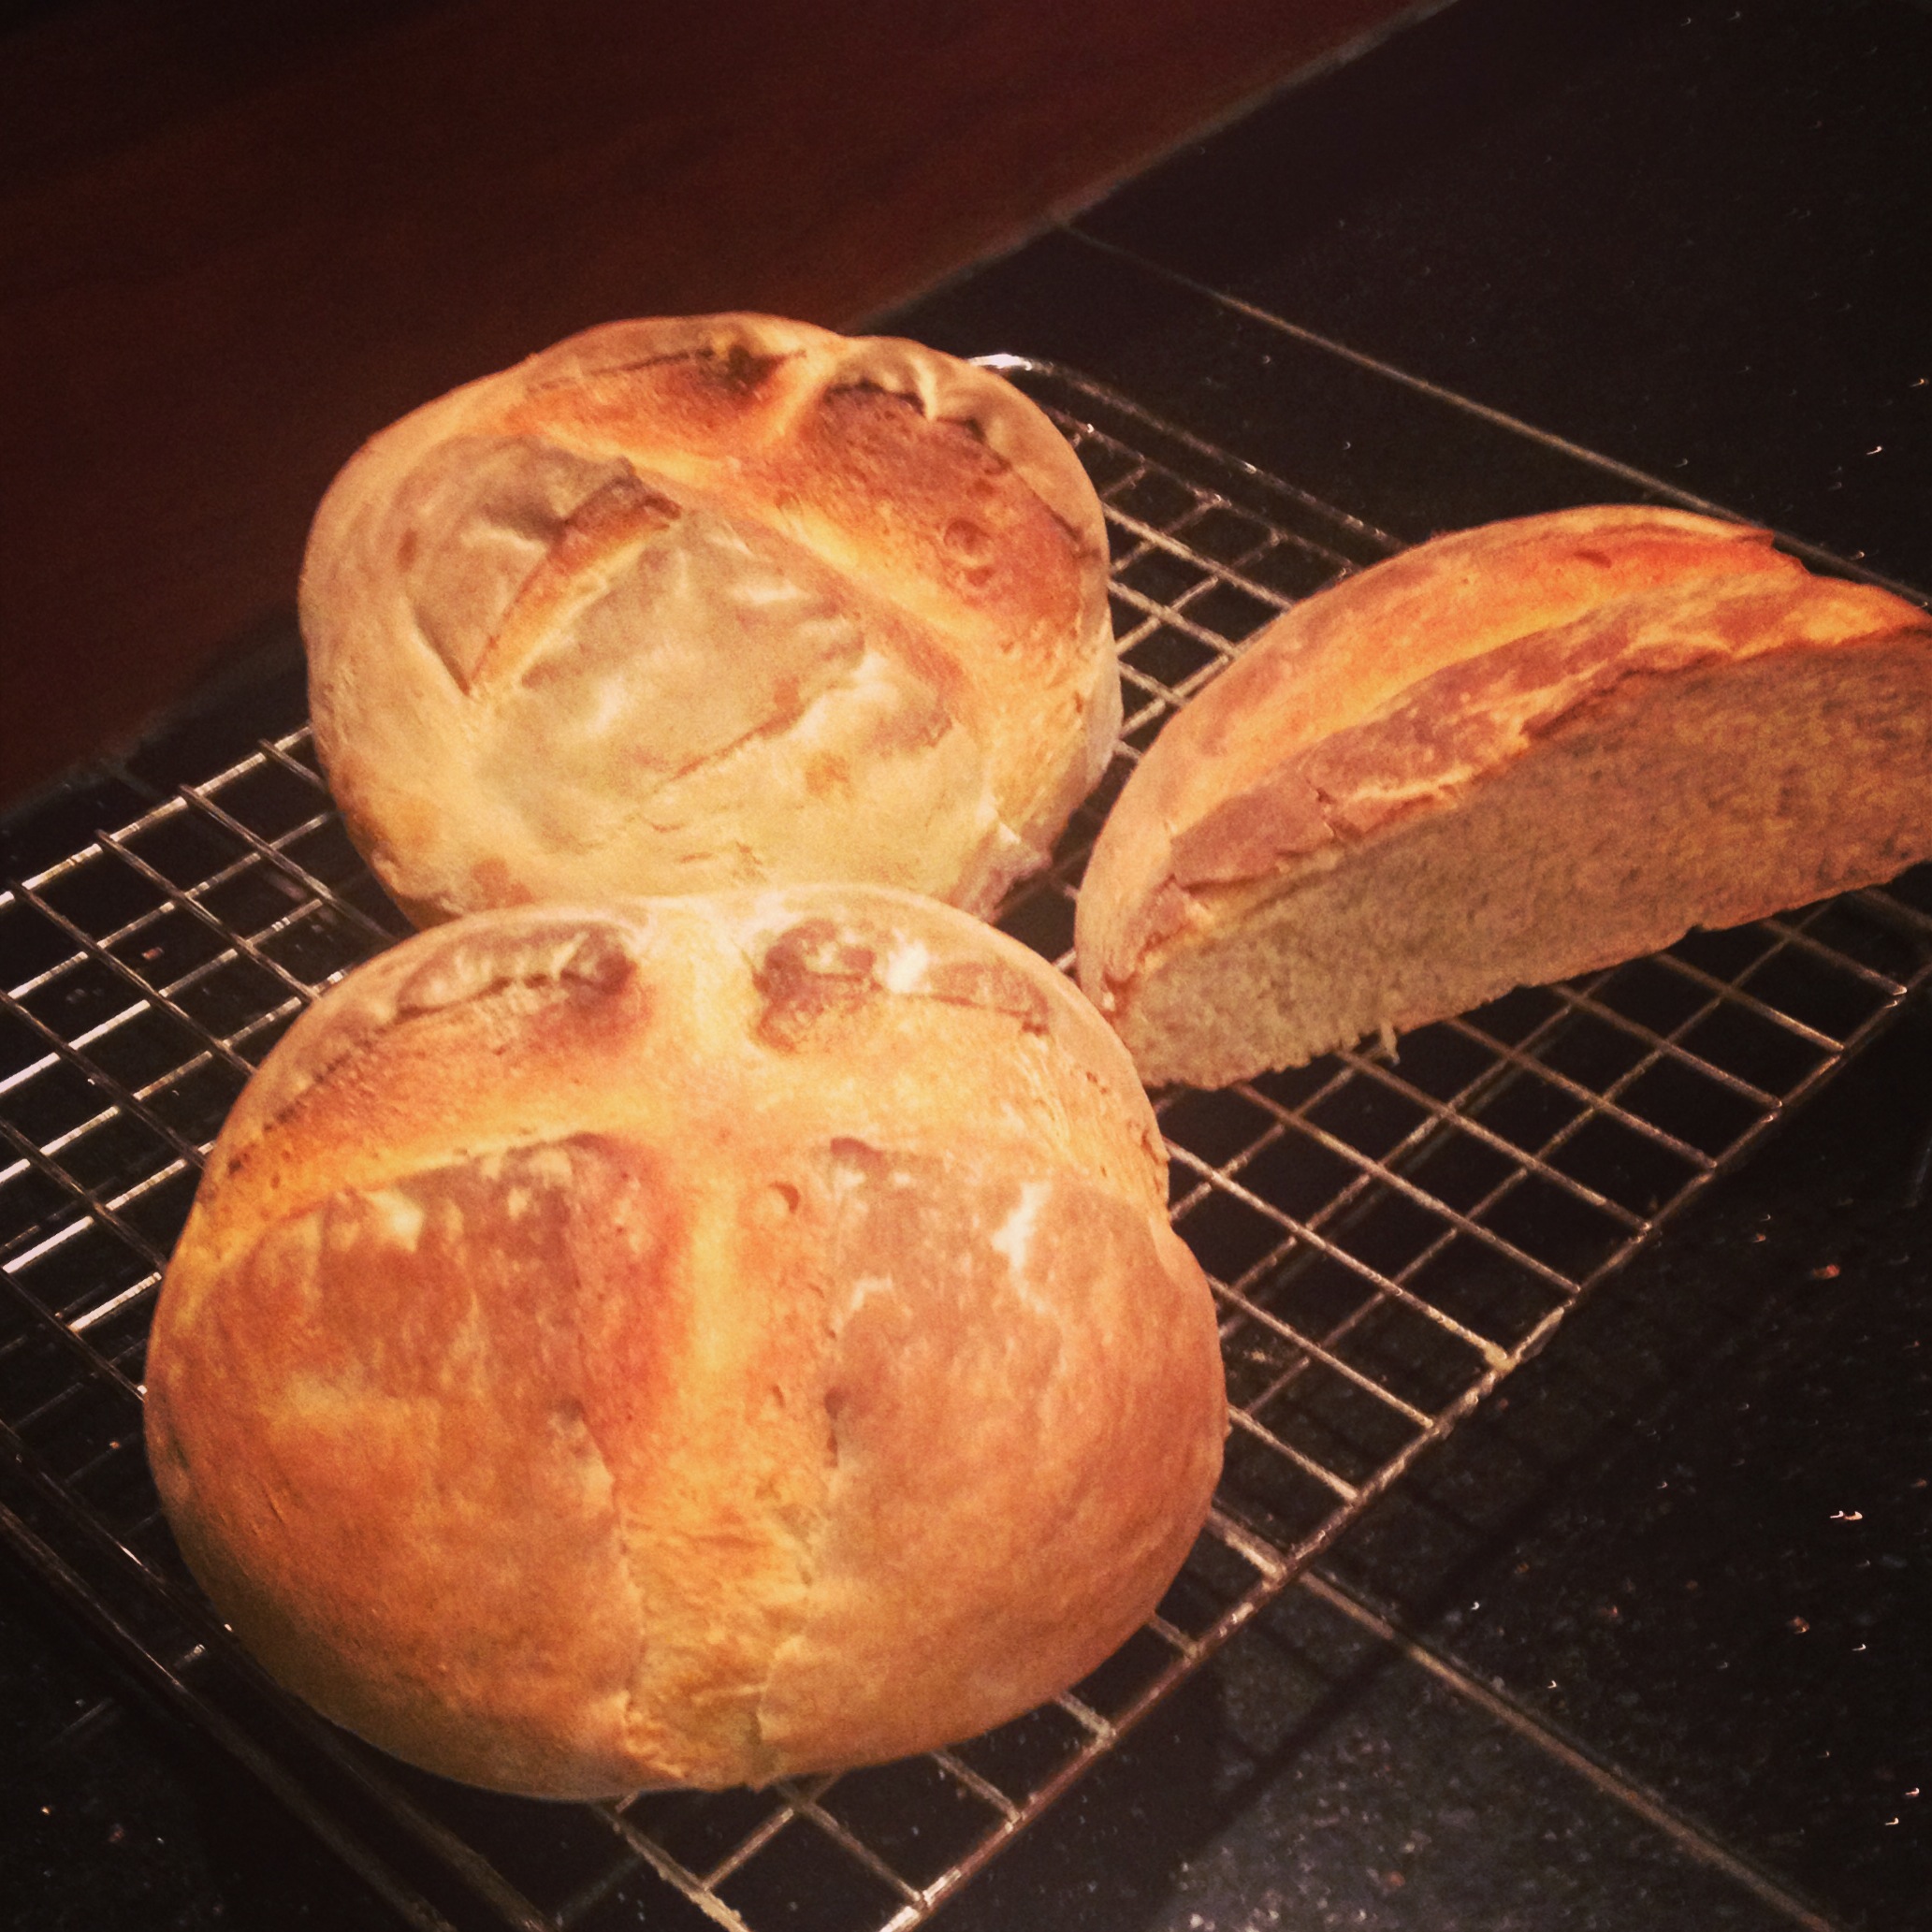 Finished Artisan Bread!